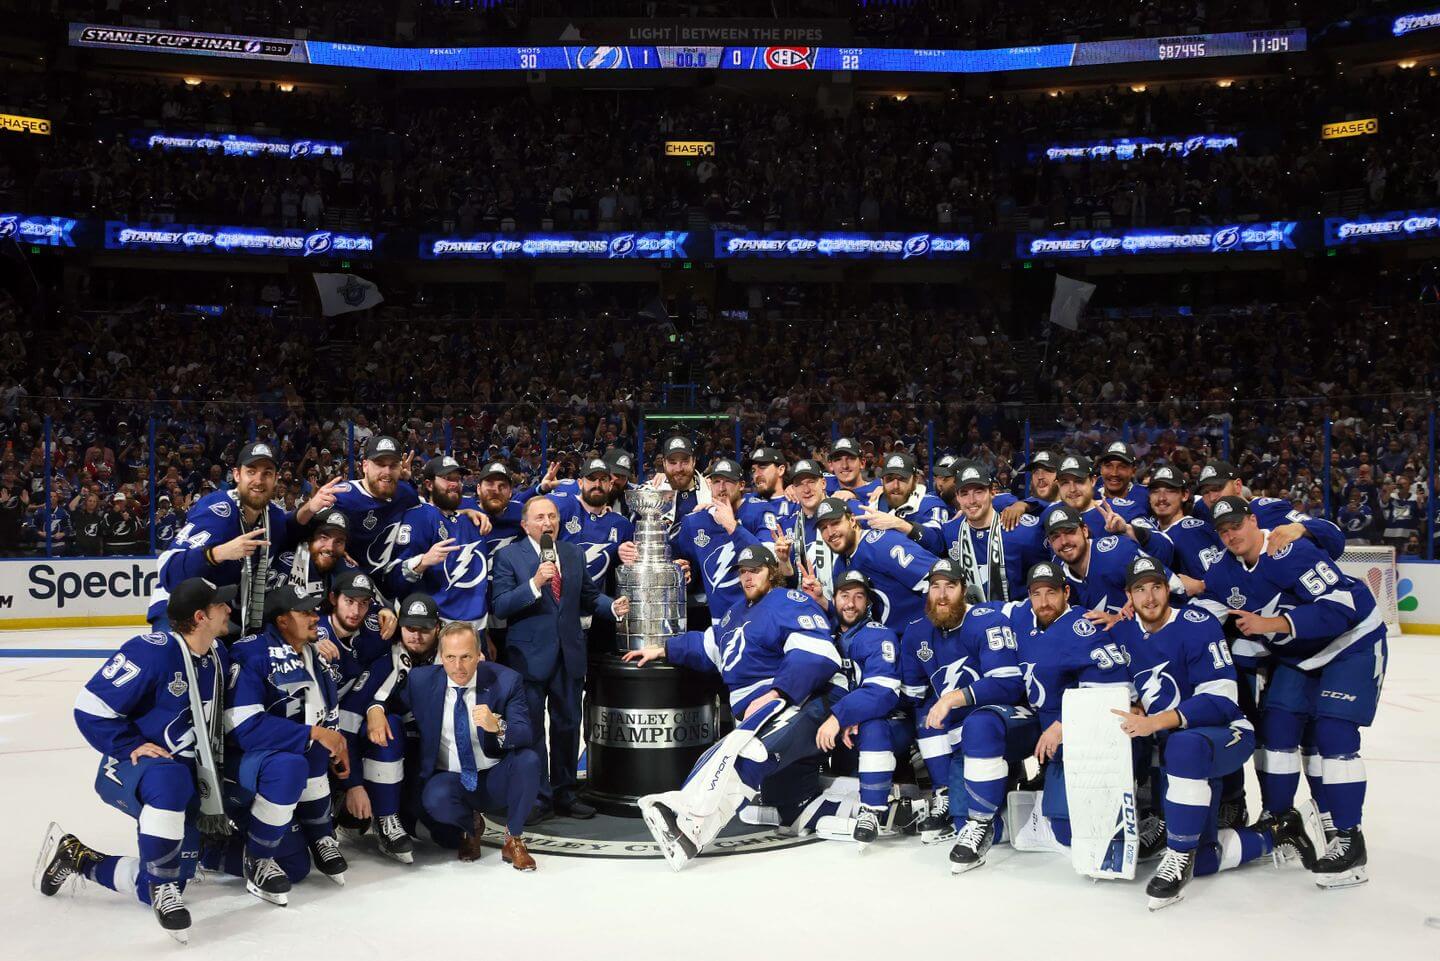 The Lightning pose for a photo after winning the Stanley Cup.